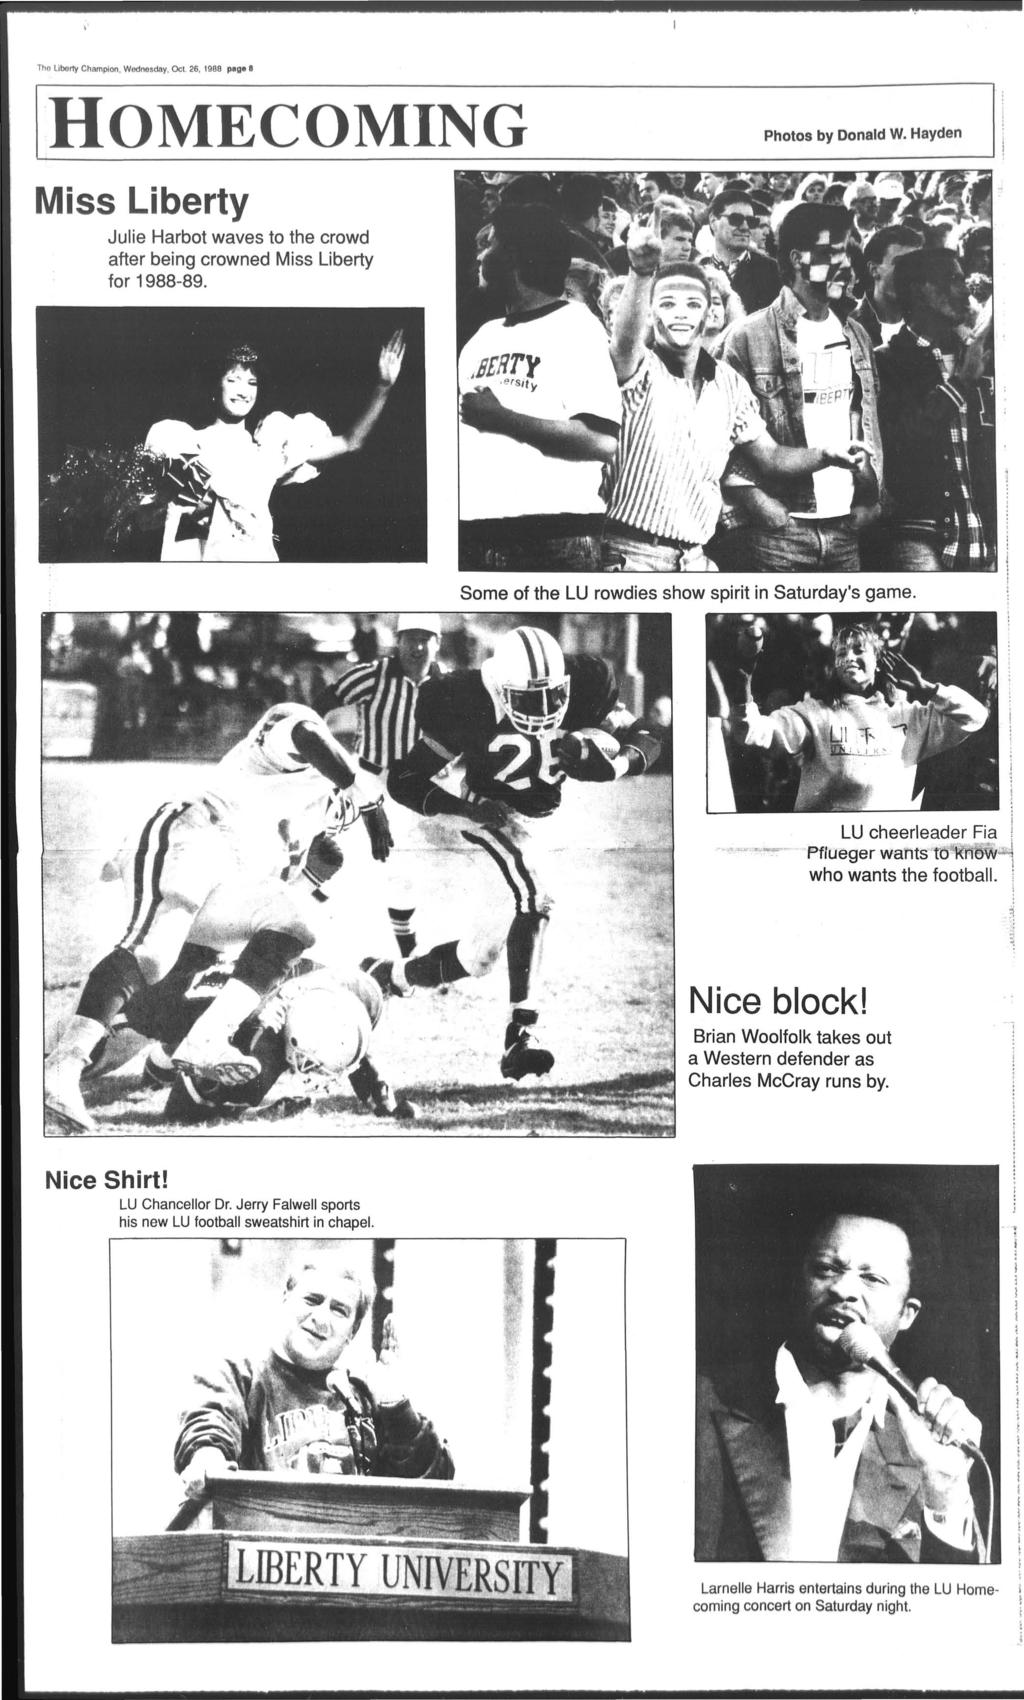 The Lberty Champon, Wednesday, Oct. 26, 1988 page 8 HOMECOMNG Mss Lberty Jule Harbot waves to the crowd after beng crowned Mss Lberty for 1988-89. Photos by Donald W.